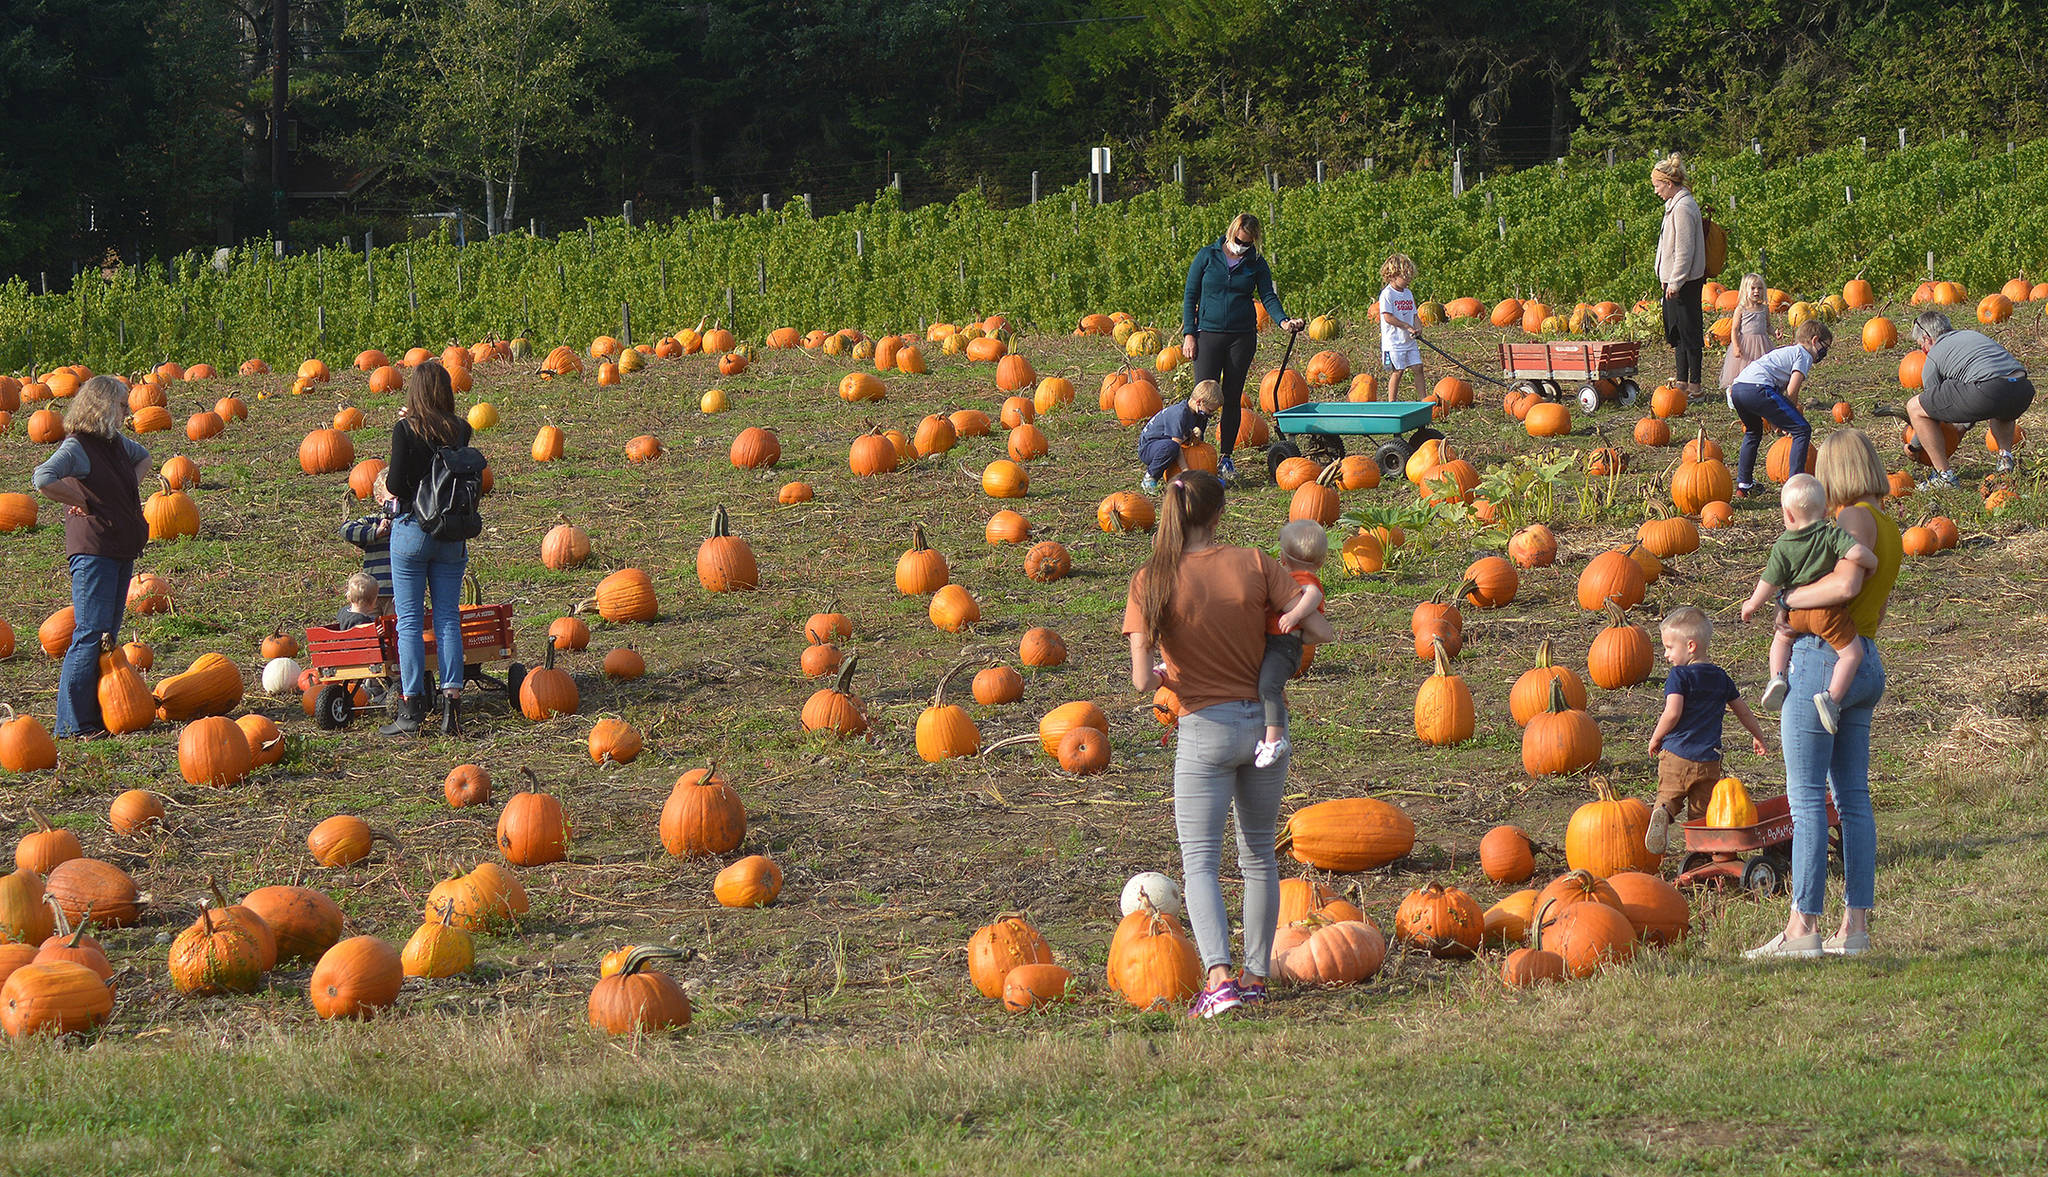 A nice-size crowd gathers on a recent sunny day at the field containing thousands of pumpkins.